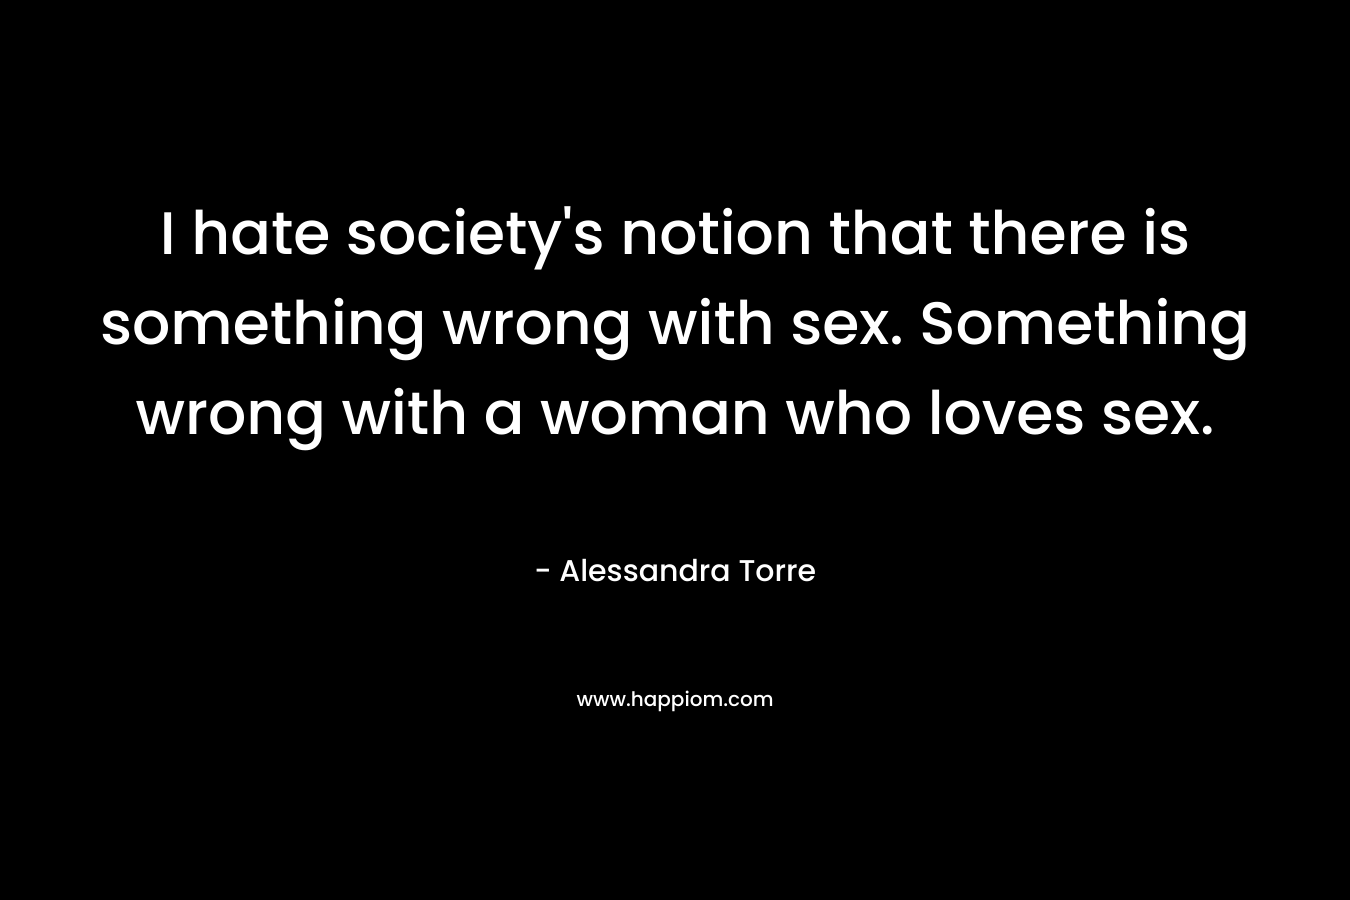 I hate society’s notion that there is something wrong with sex. Something wrong with a woman who loves sex. – Alessandra Torre